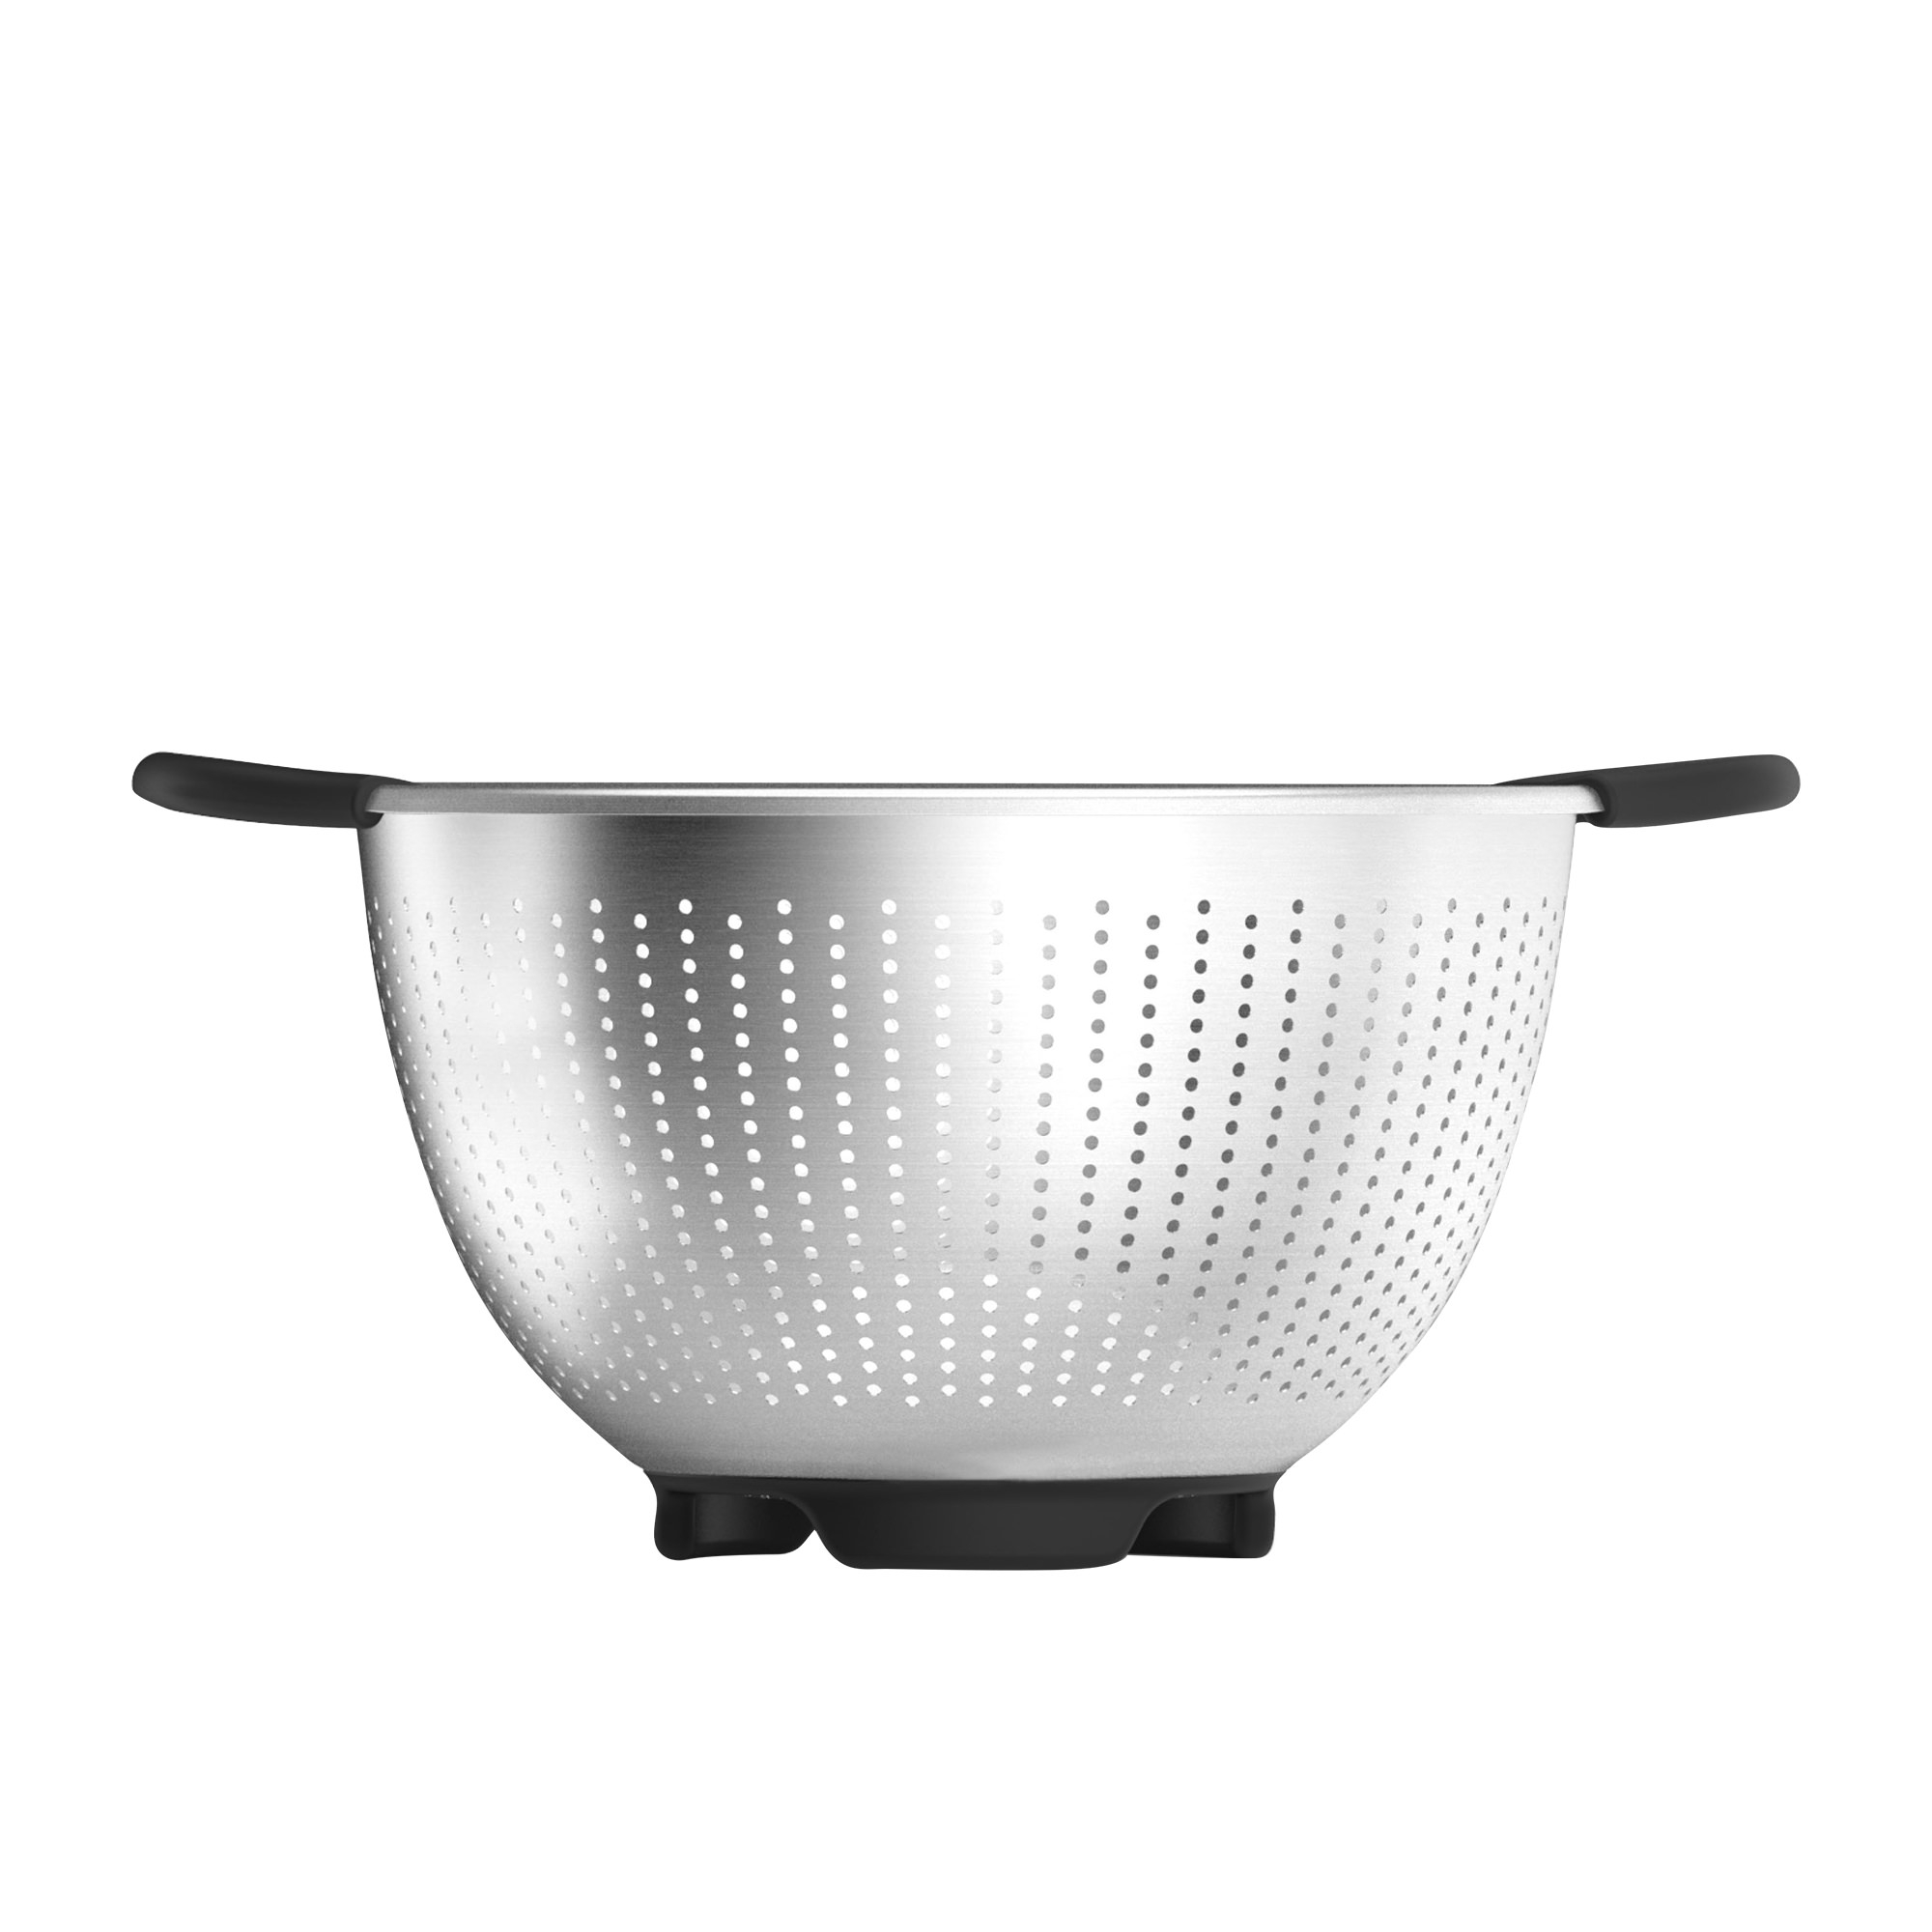 OXO Good Grips Stainless Steel Colander 28.5cm Image 1